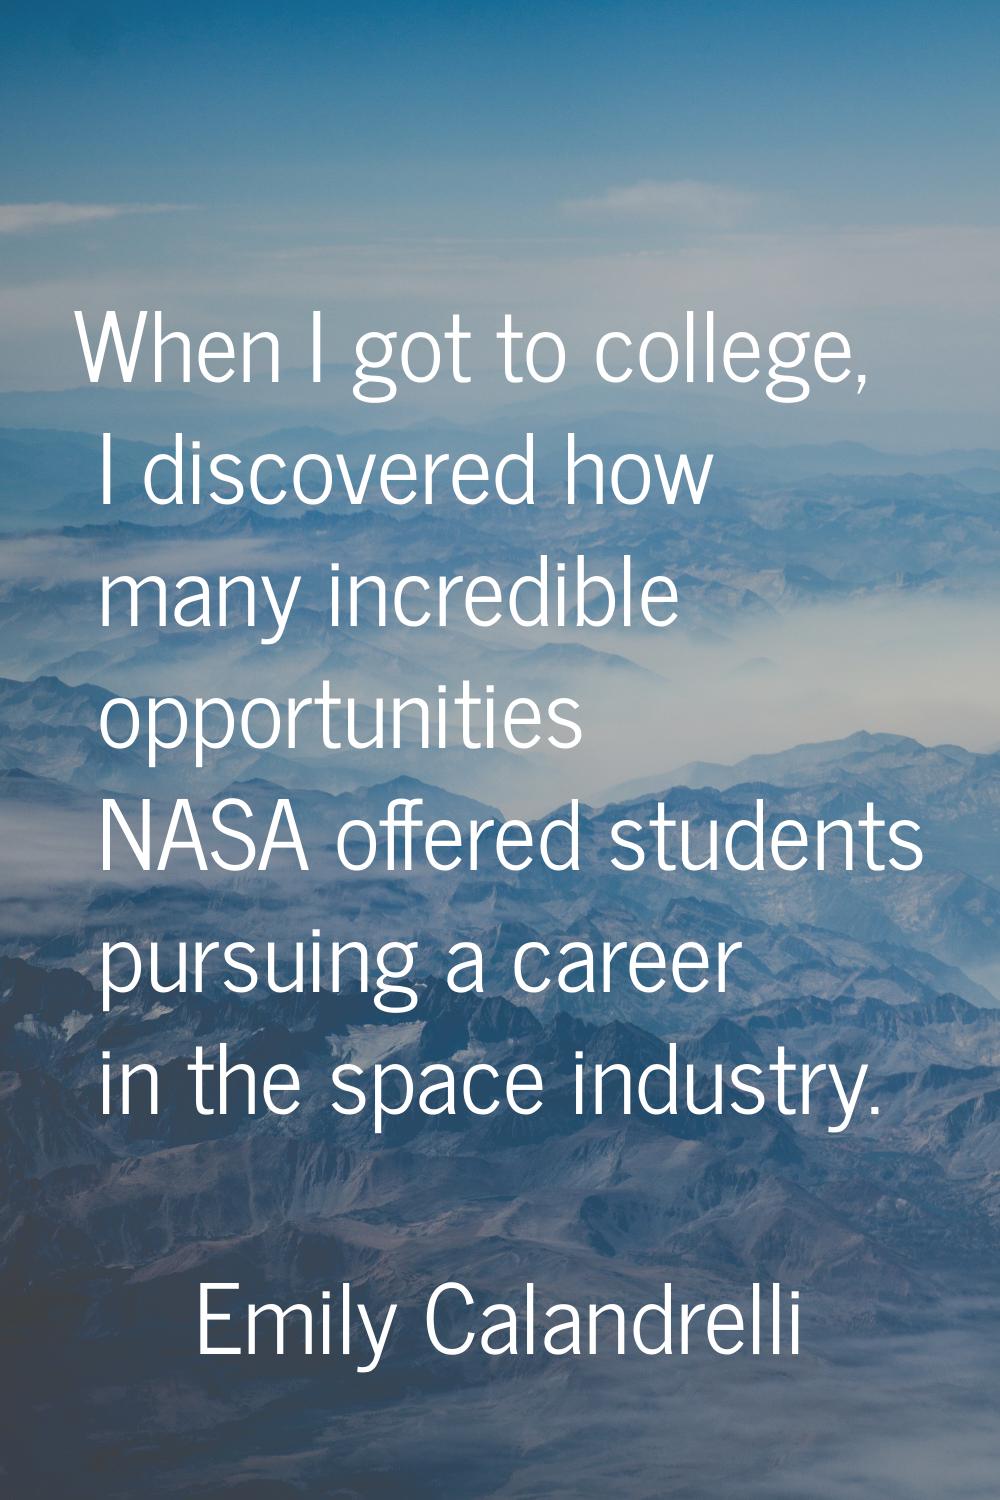 When I got to college, I discovered how many incredible opportunities NASA offered students pursuin